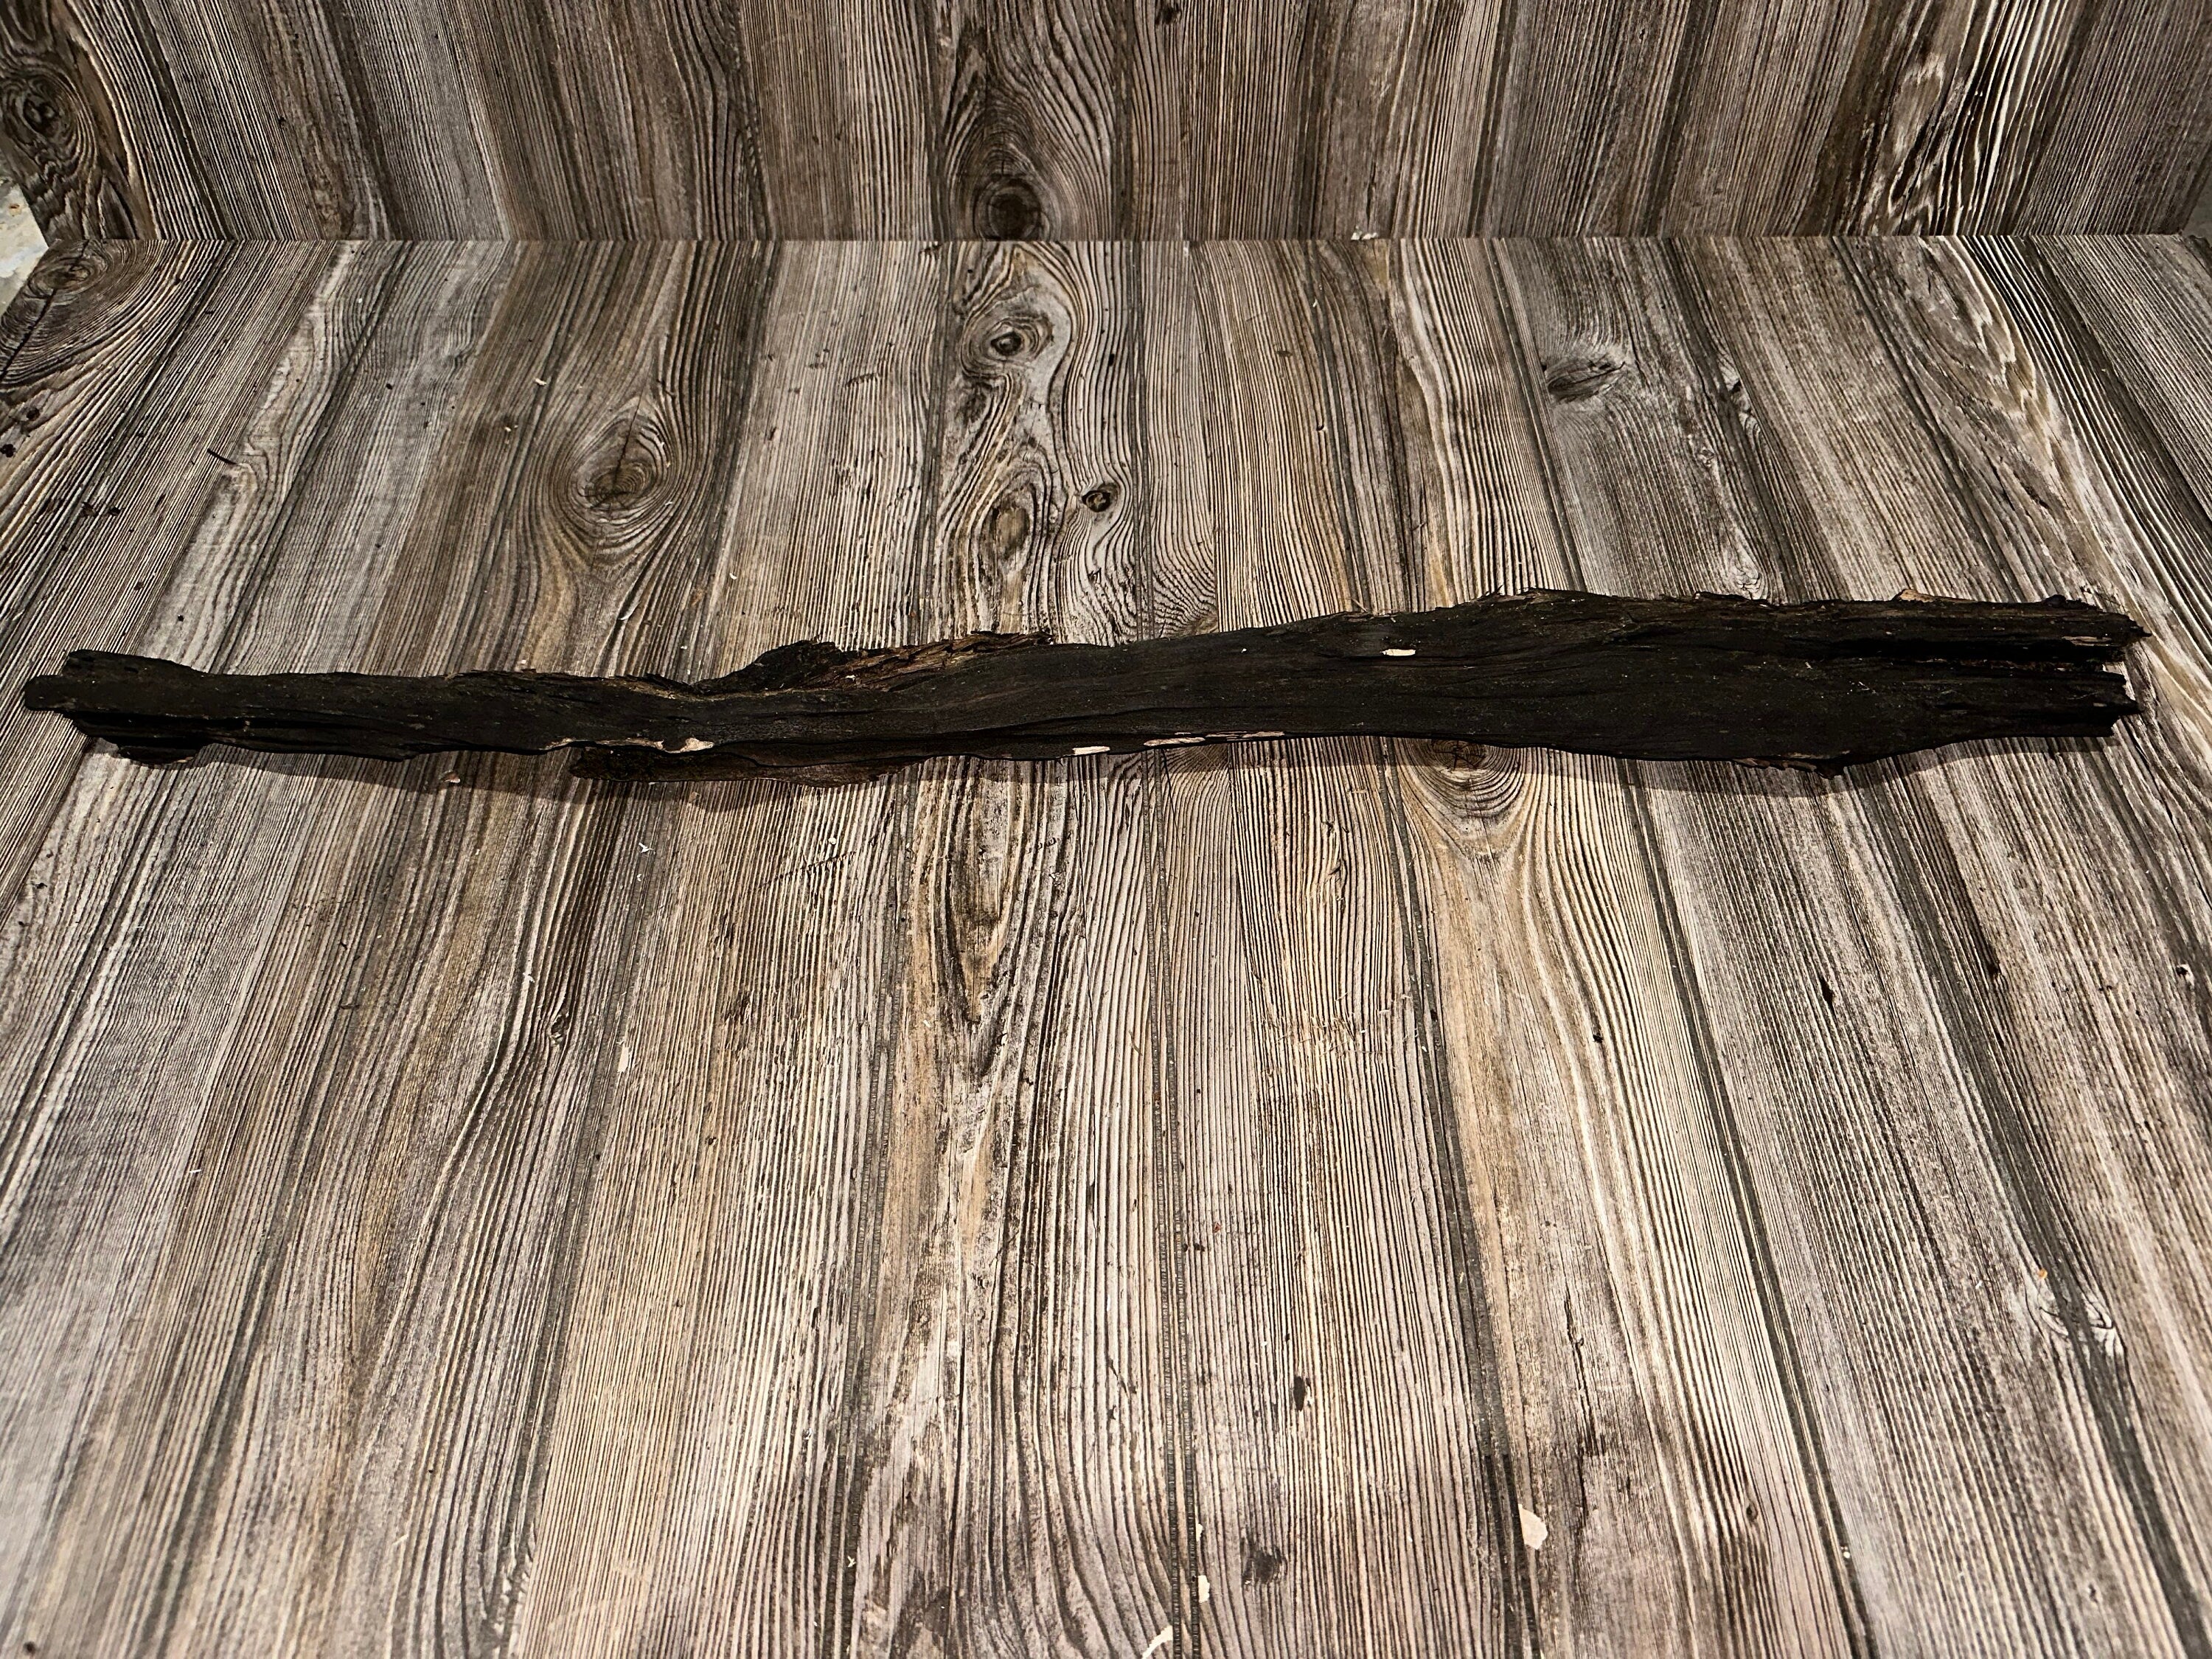 Tree Limb, Branch End, Driftwood, Approximately 33.5 Inches Long by 3 Inches Wide and 3 Inches Tall